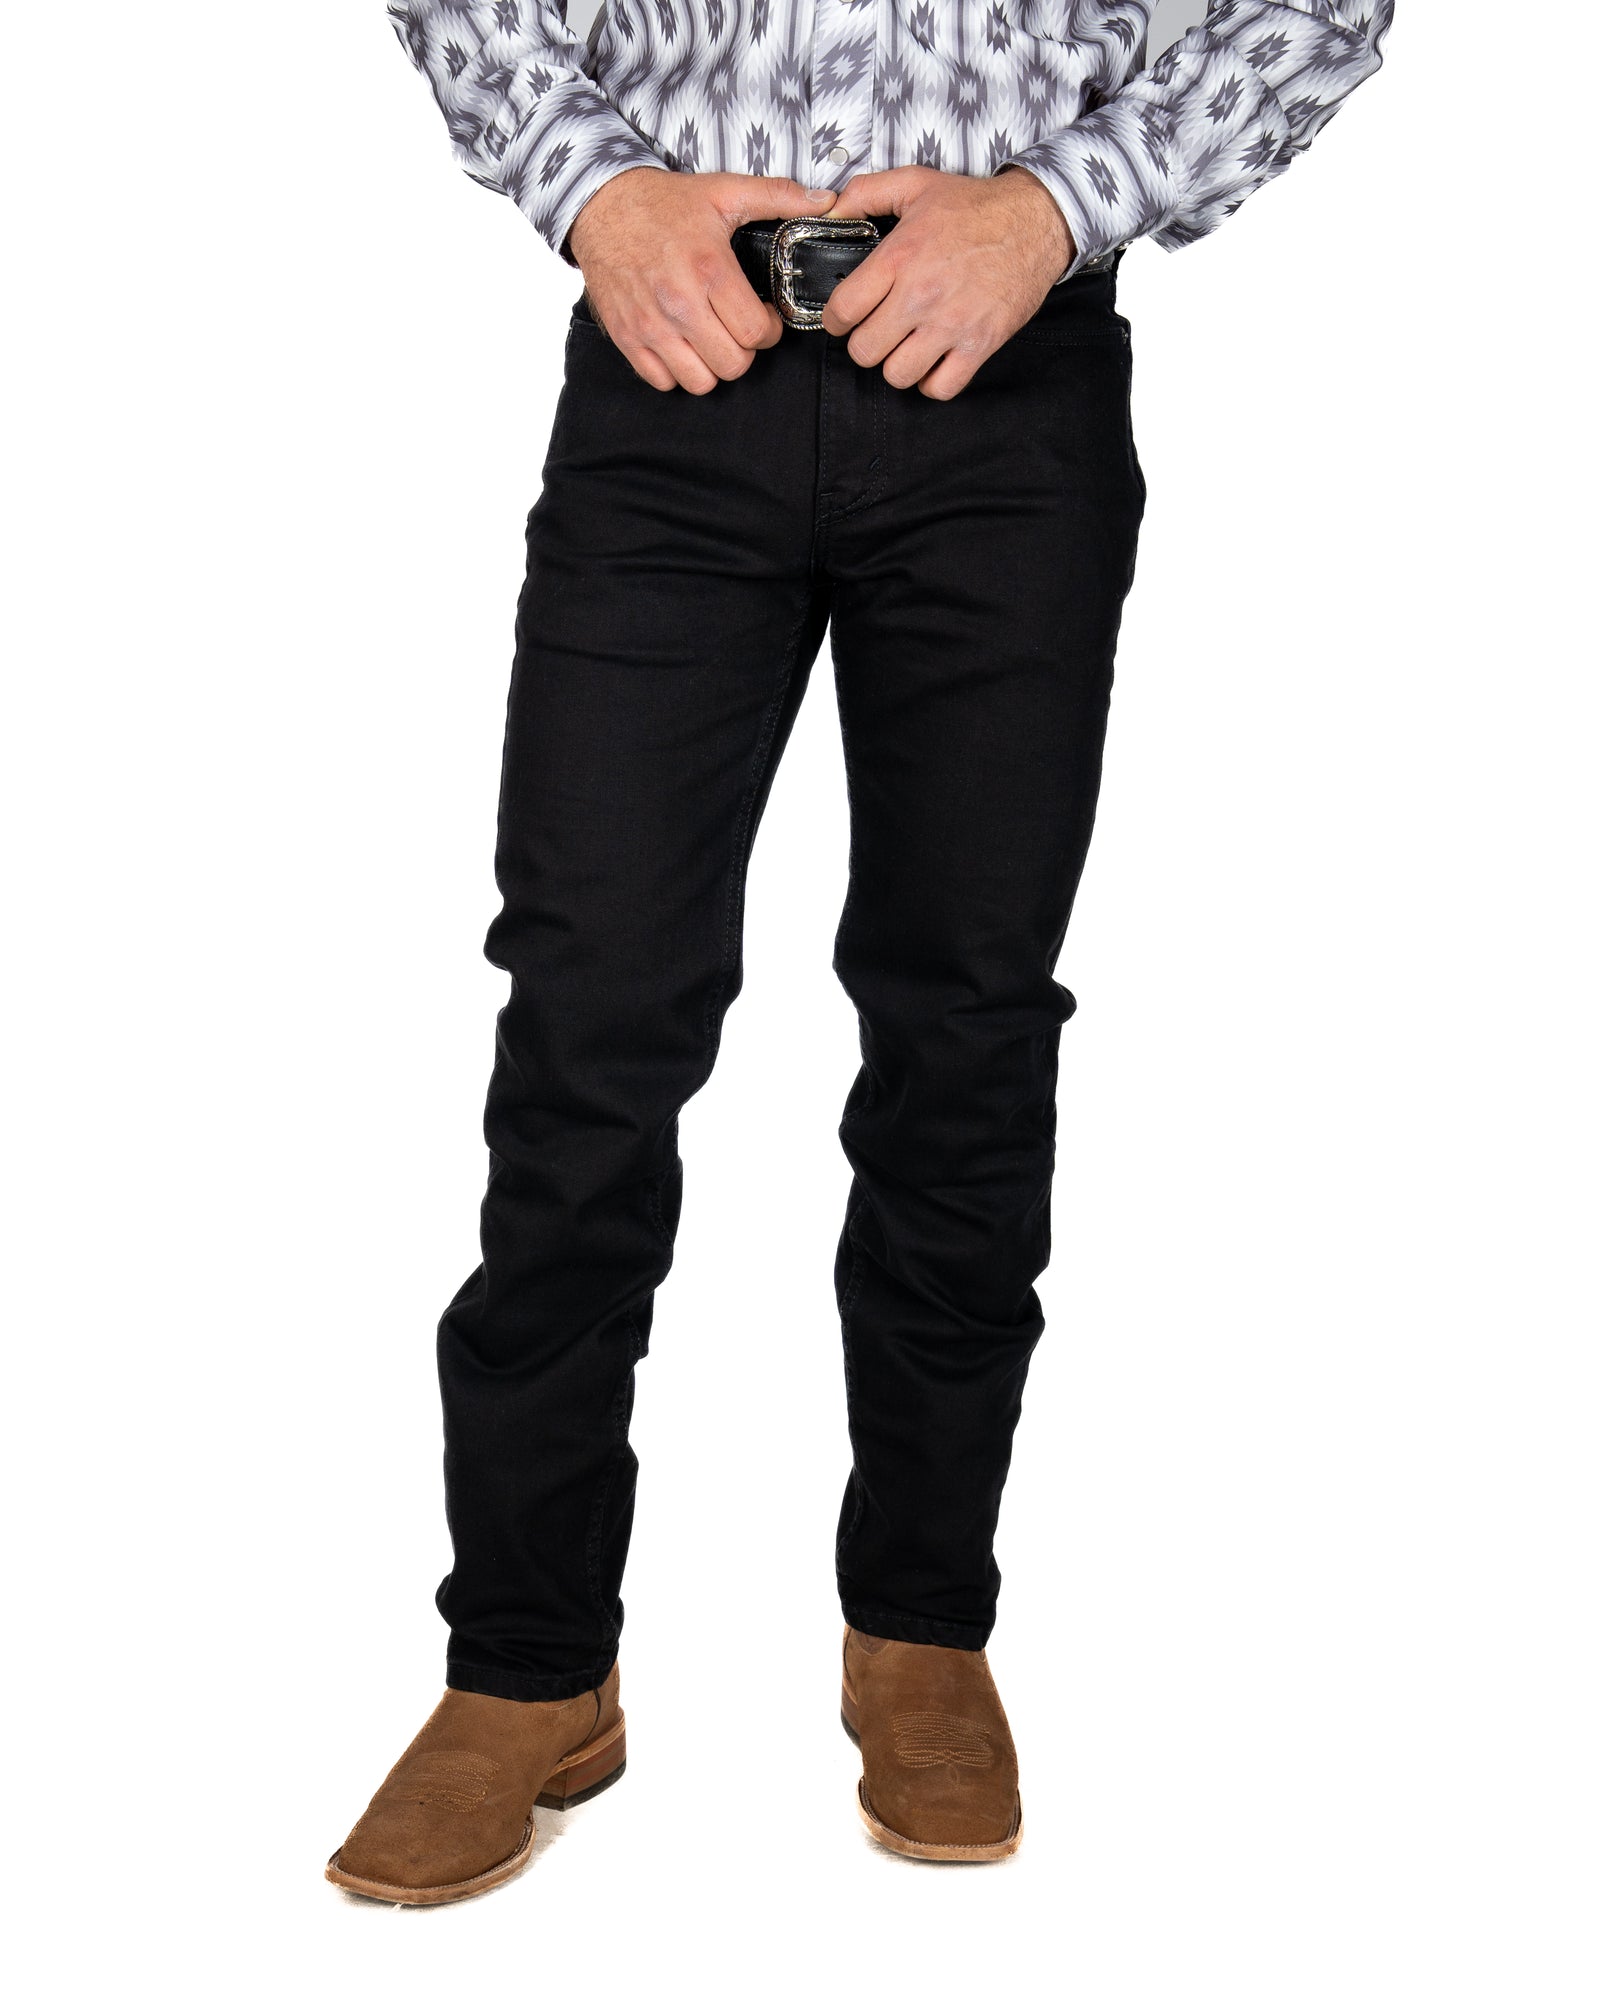 Jeans Levis 514 Straight Stretch Caballero